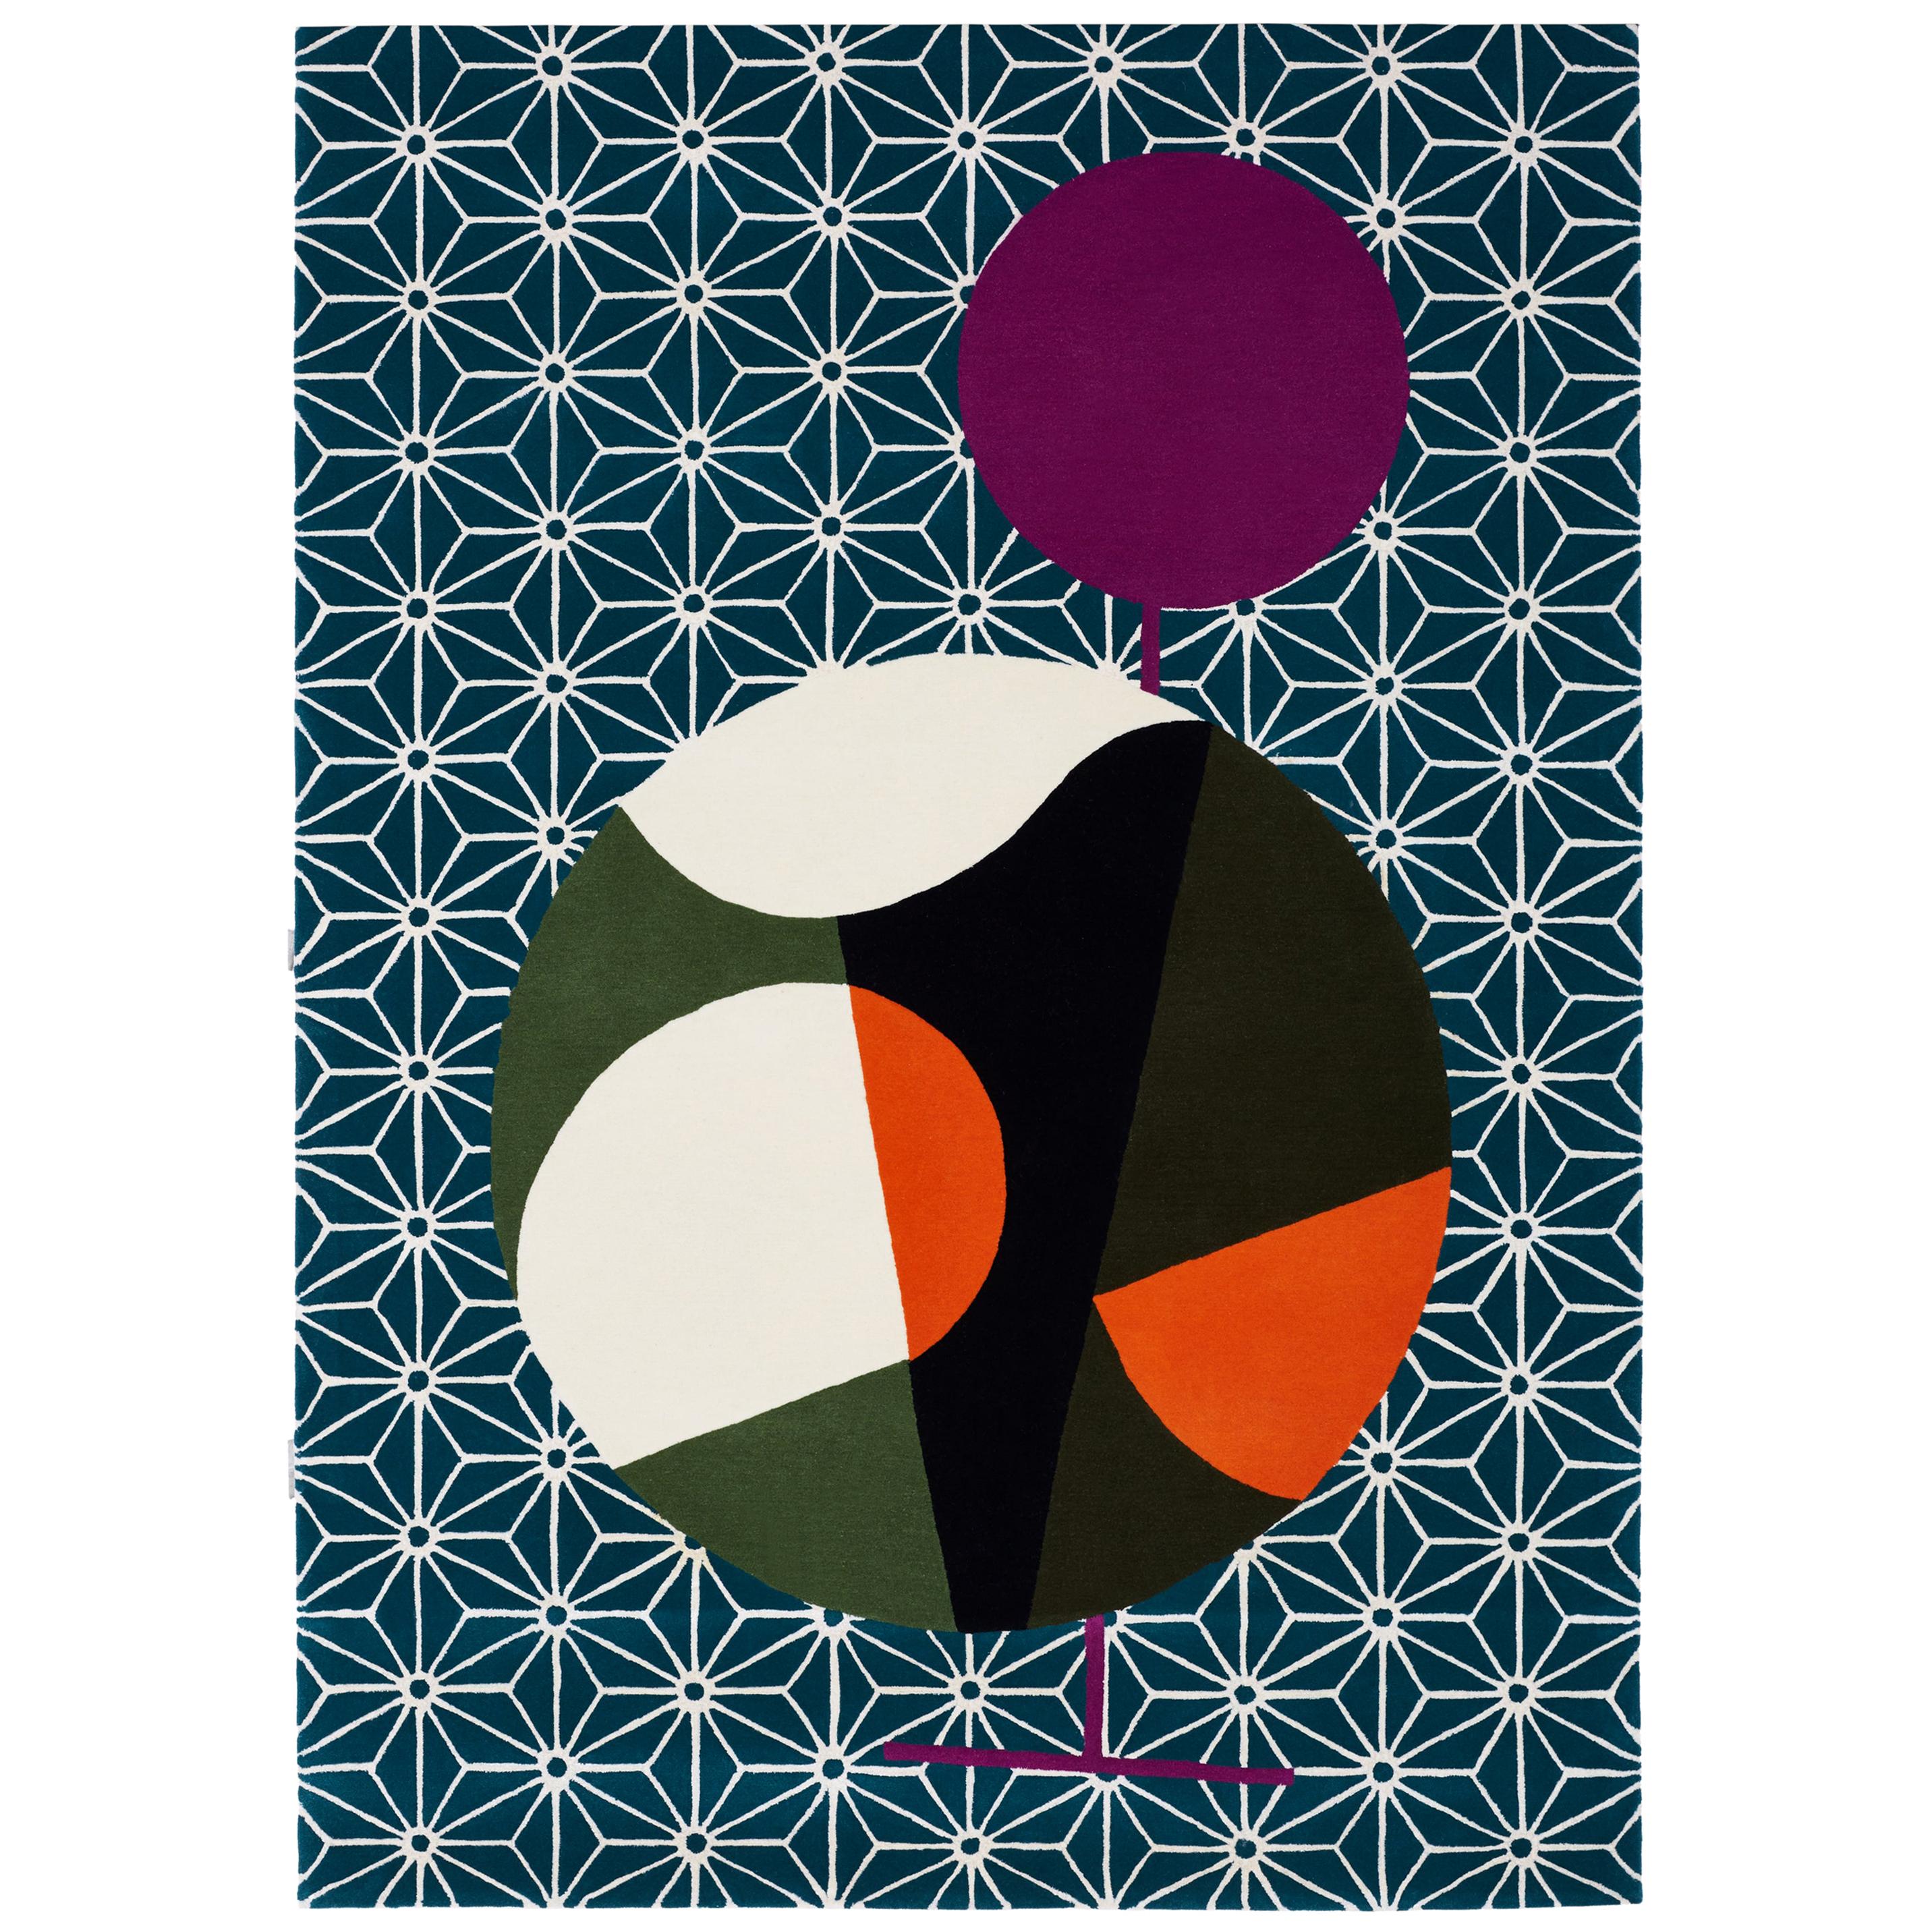 Abstract Dadaist Contemporary Rug Inspired by Sophie Taeuber Arp